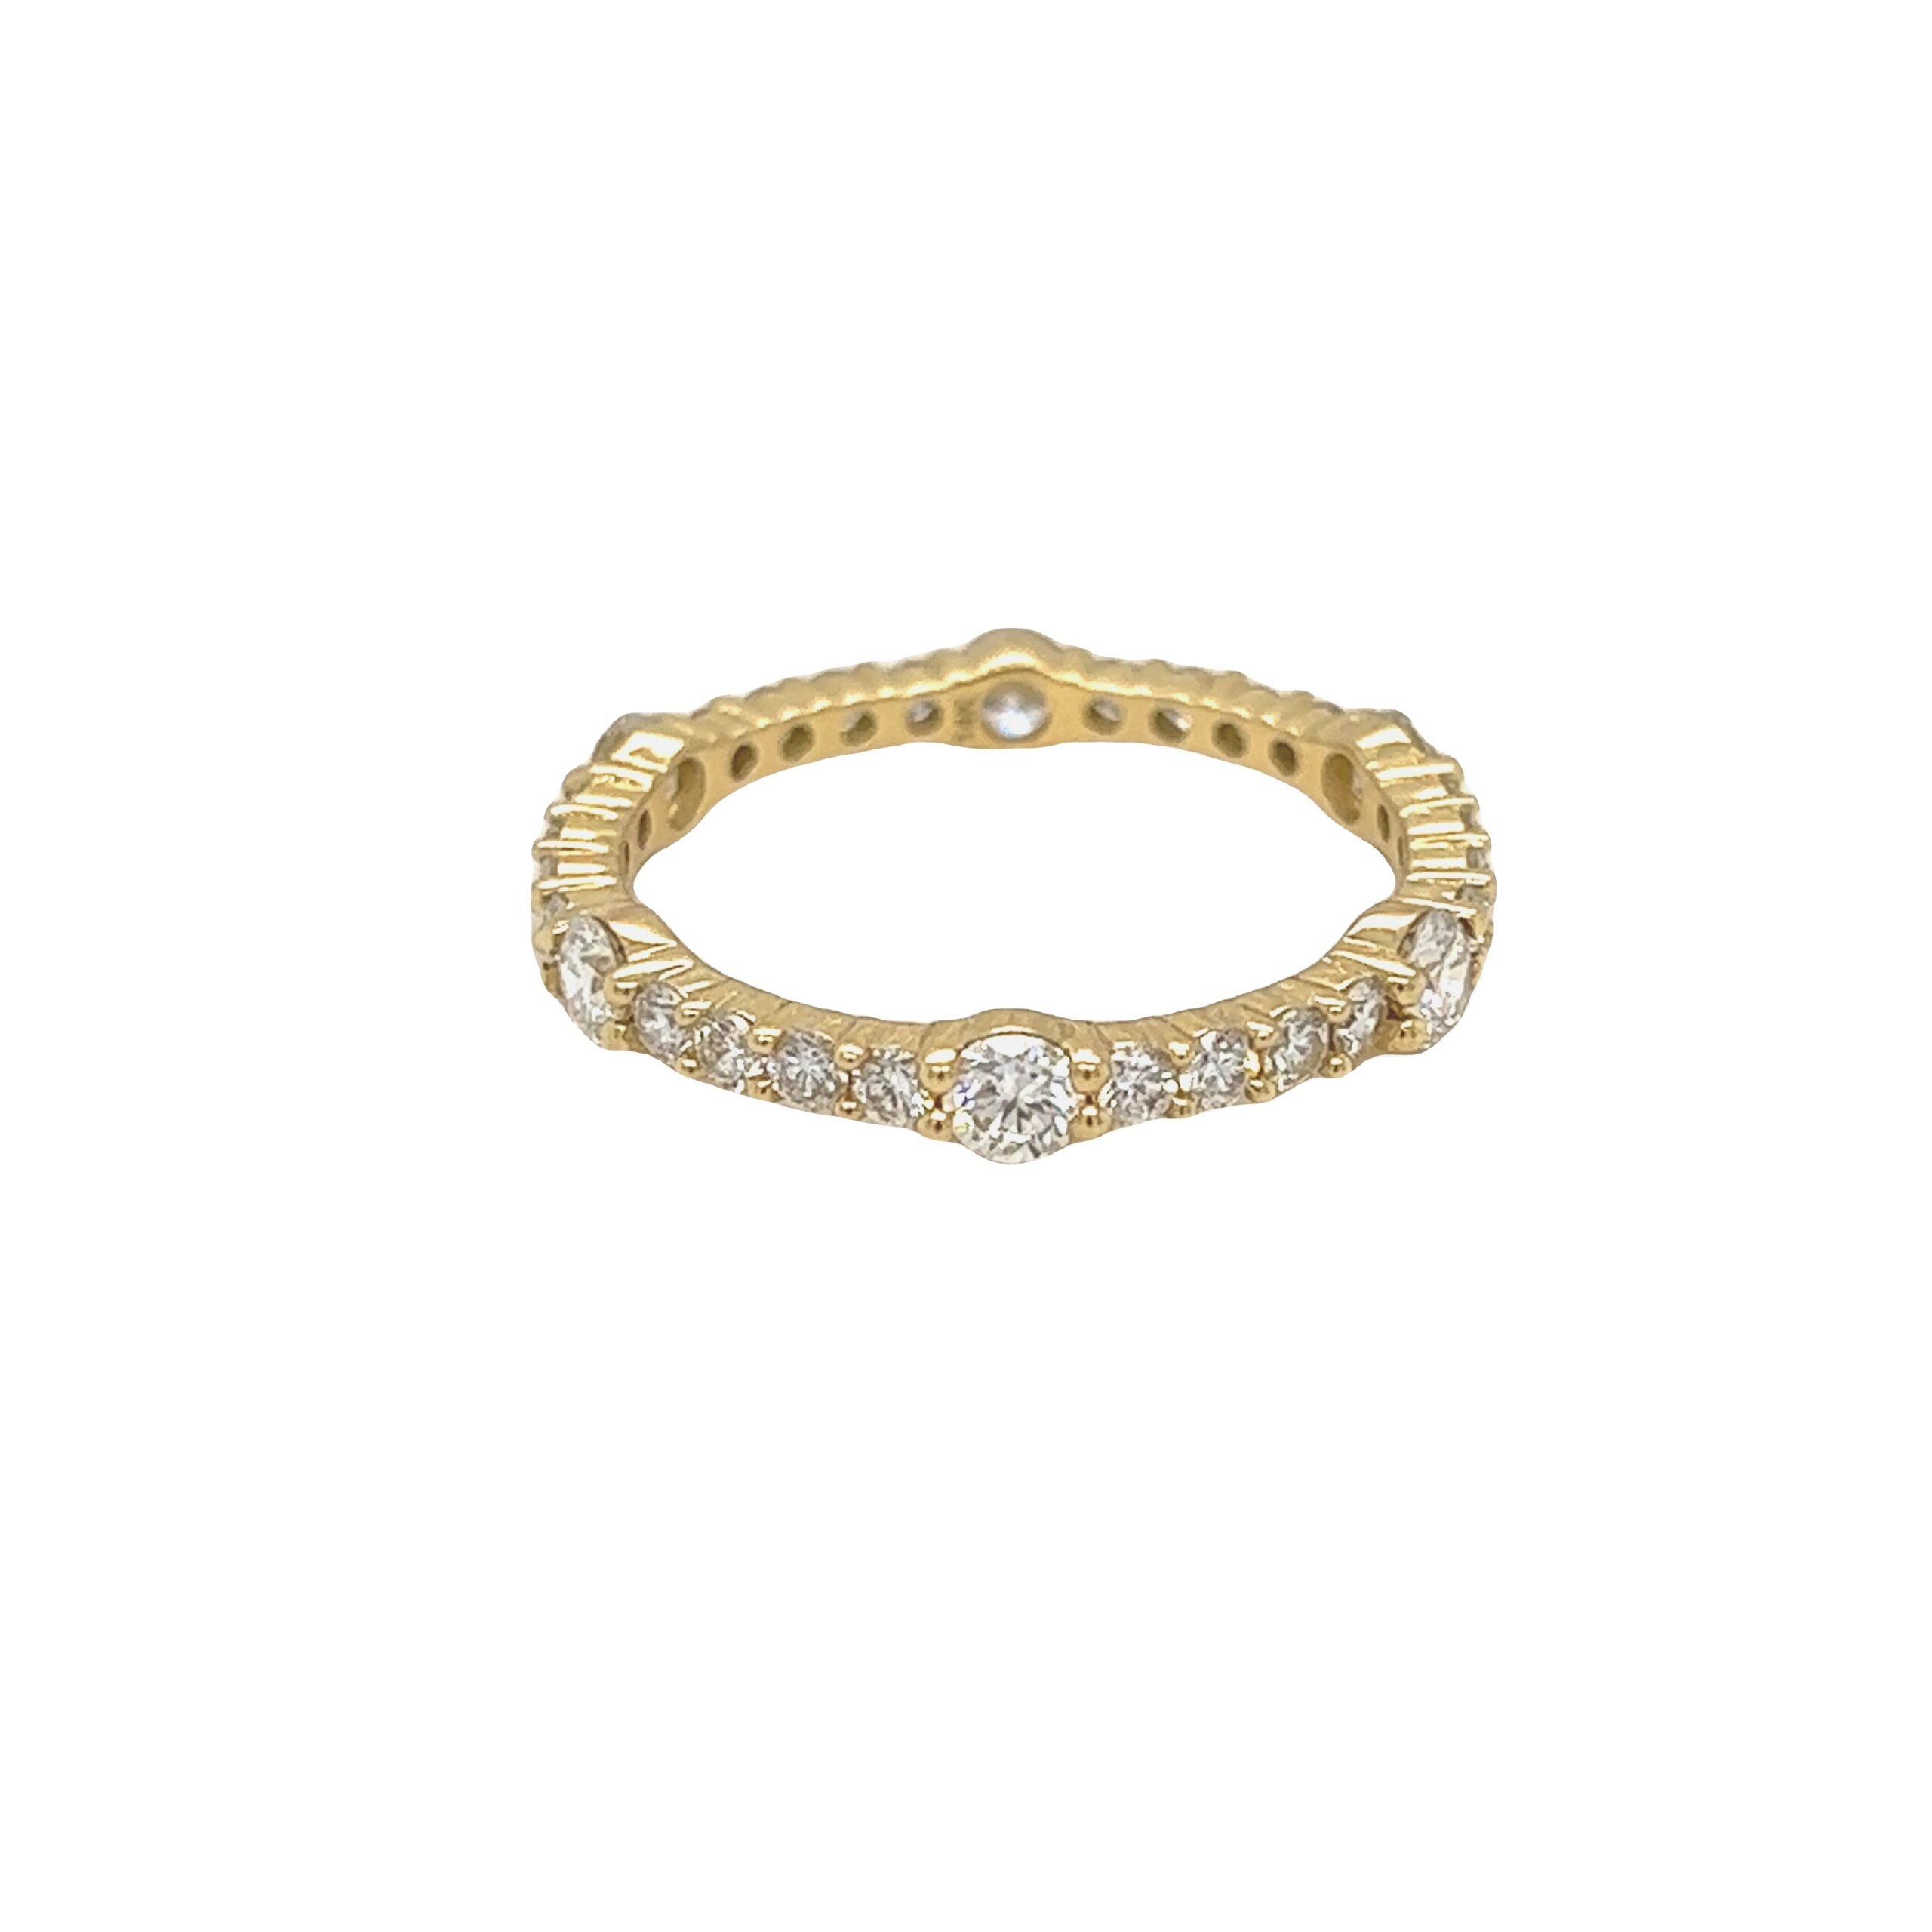 Featured image for “Brilliant Diamond Eternity Band”